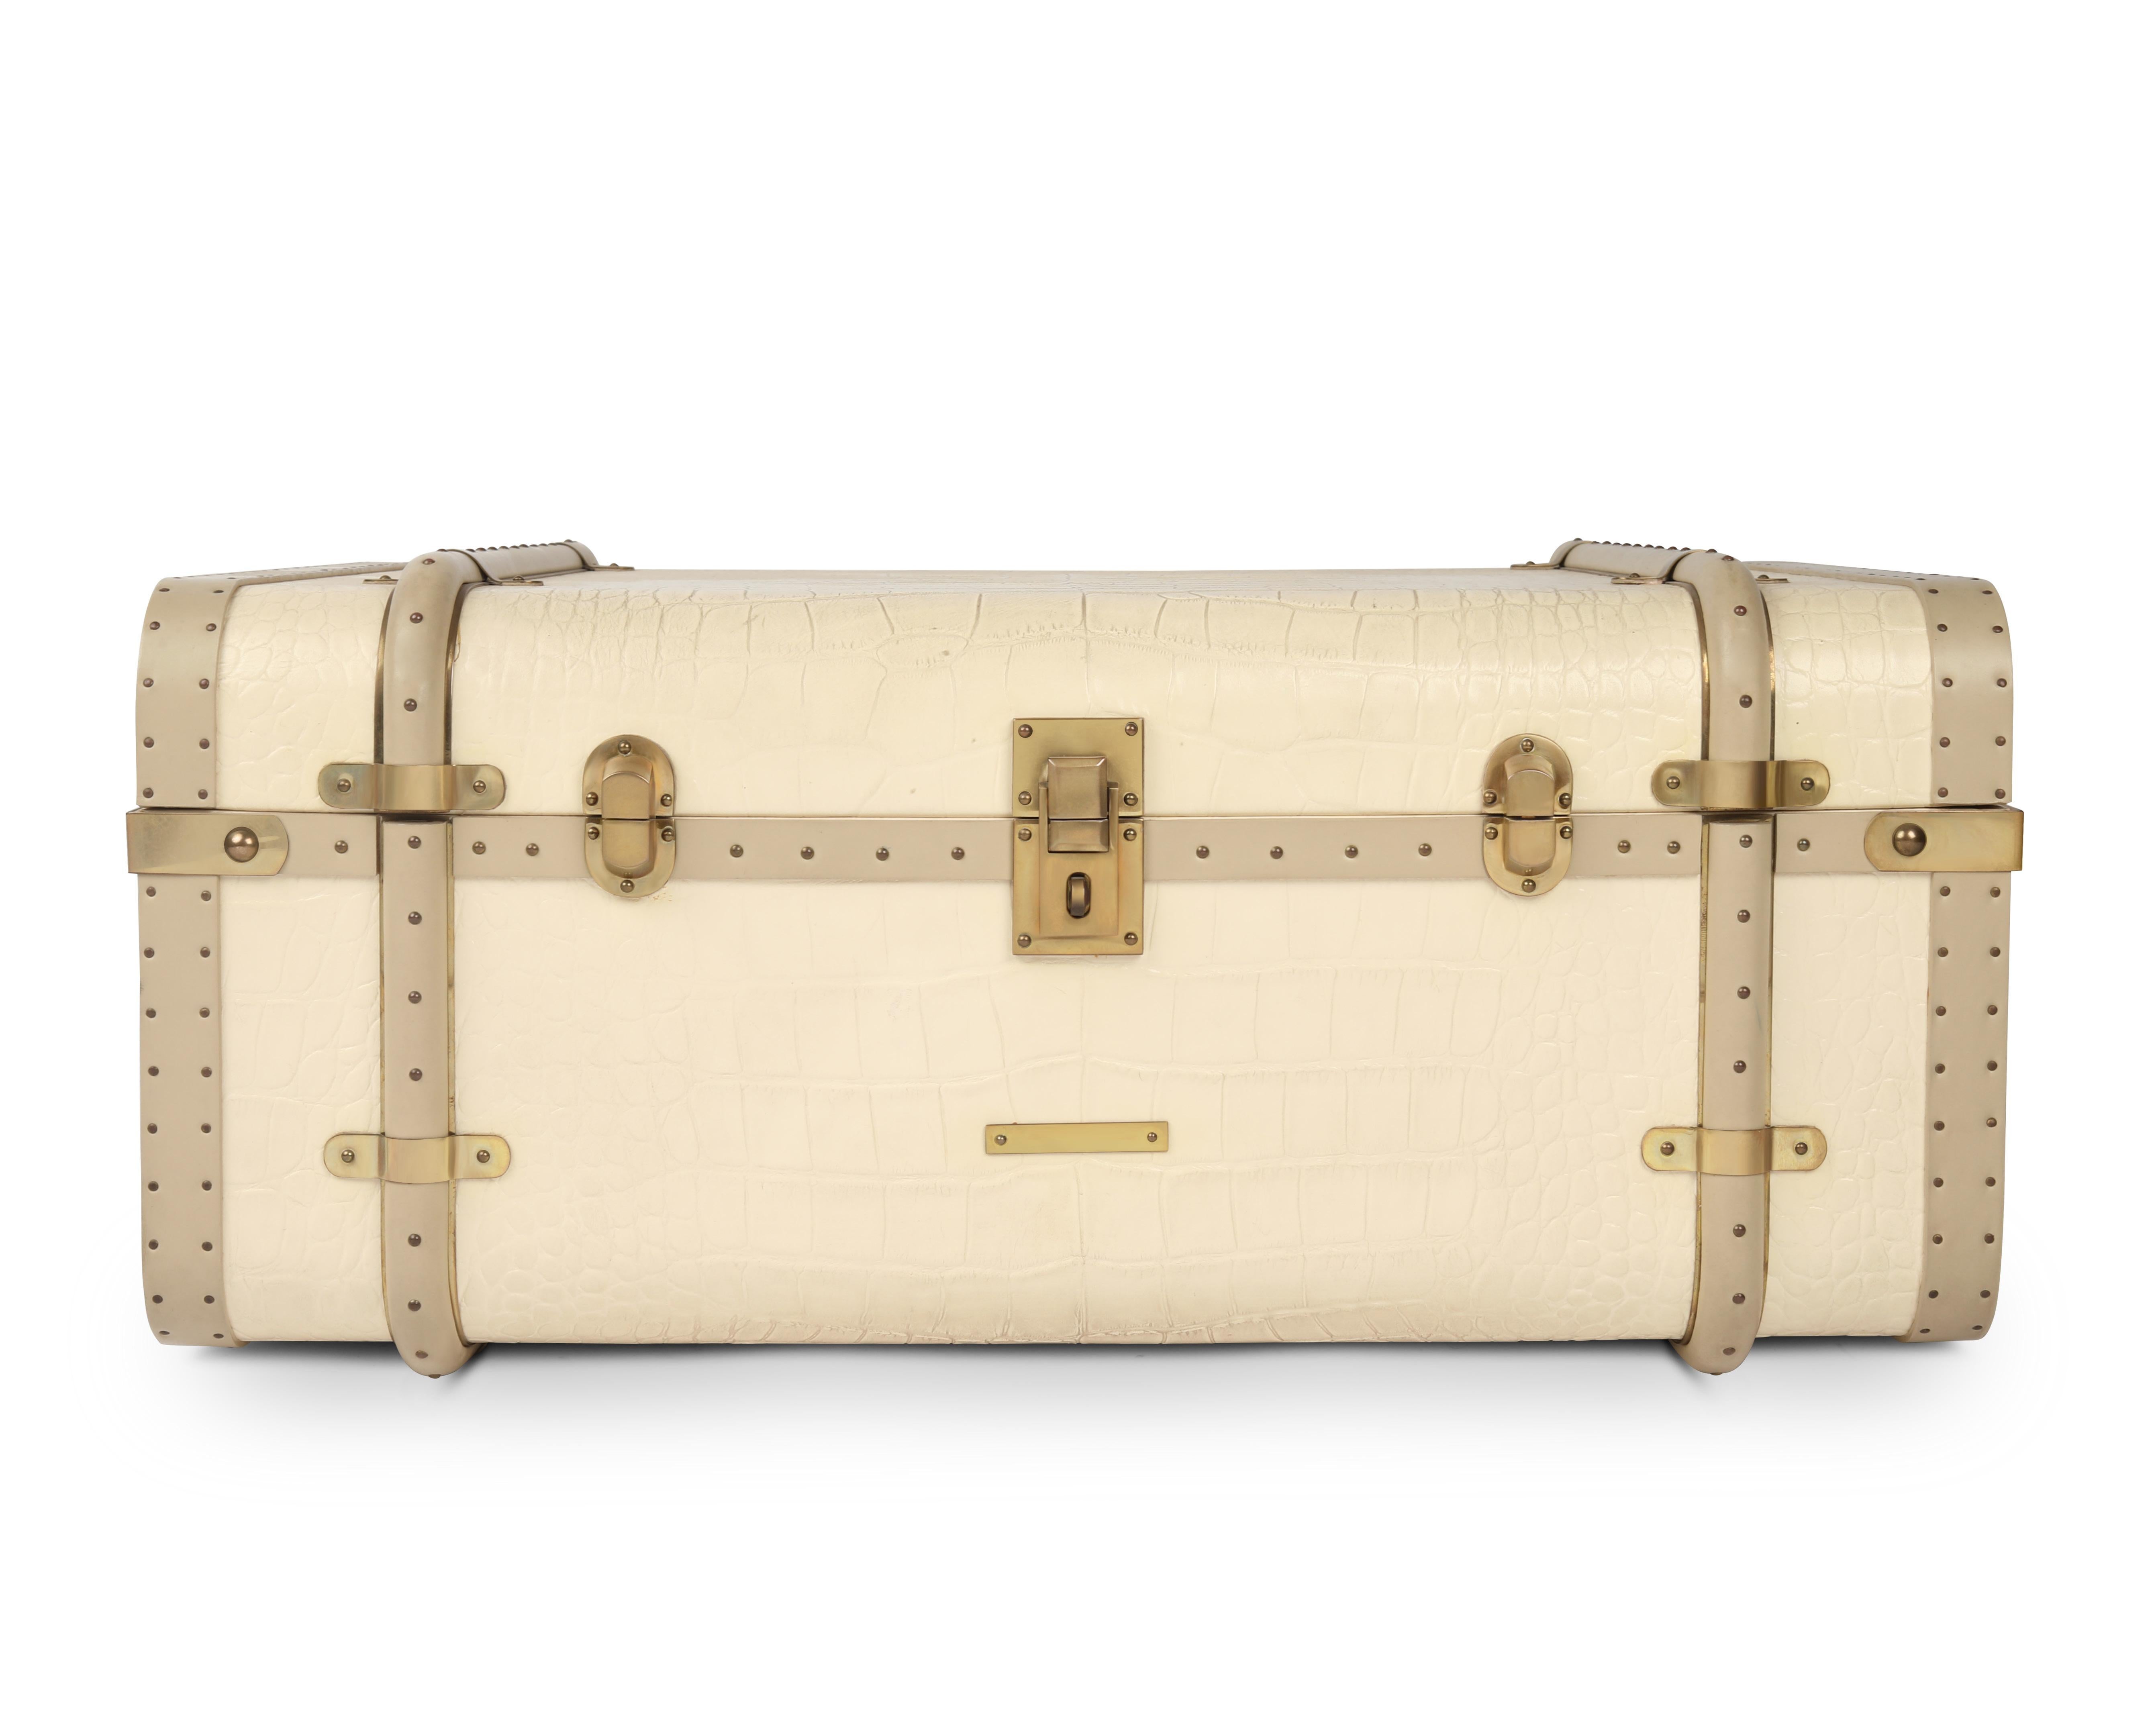 Small Coco trunk by Madheke
Dimensions: W 67 x D 46.5 x H 28.5 cm.
Materials: leather, fabric, metal.

Croco imprint leather, vintage metal trims, technical suede interior.

The COCO takes inspiration from the glorious vintage era of travel.